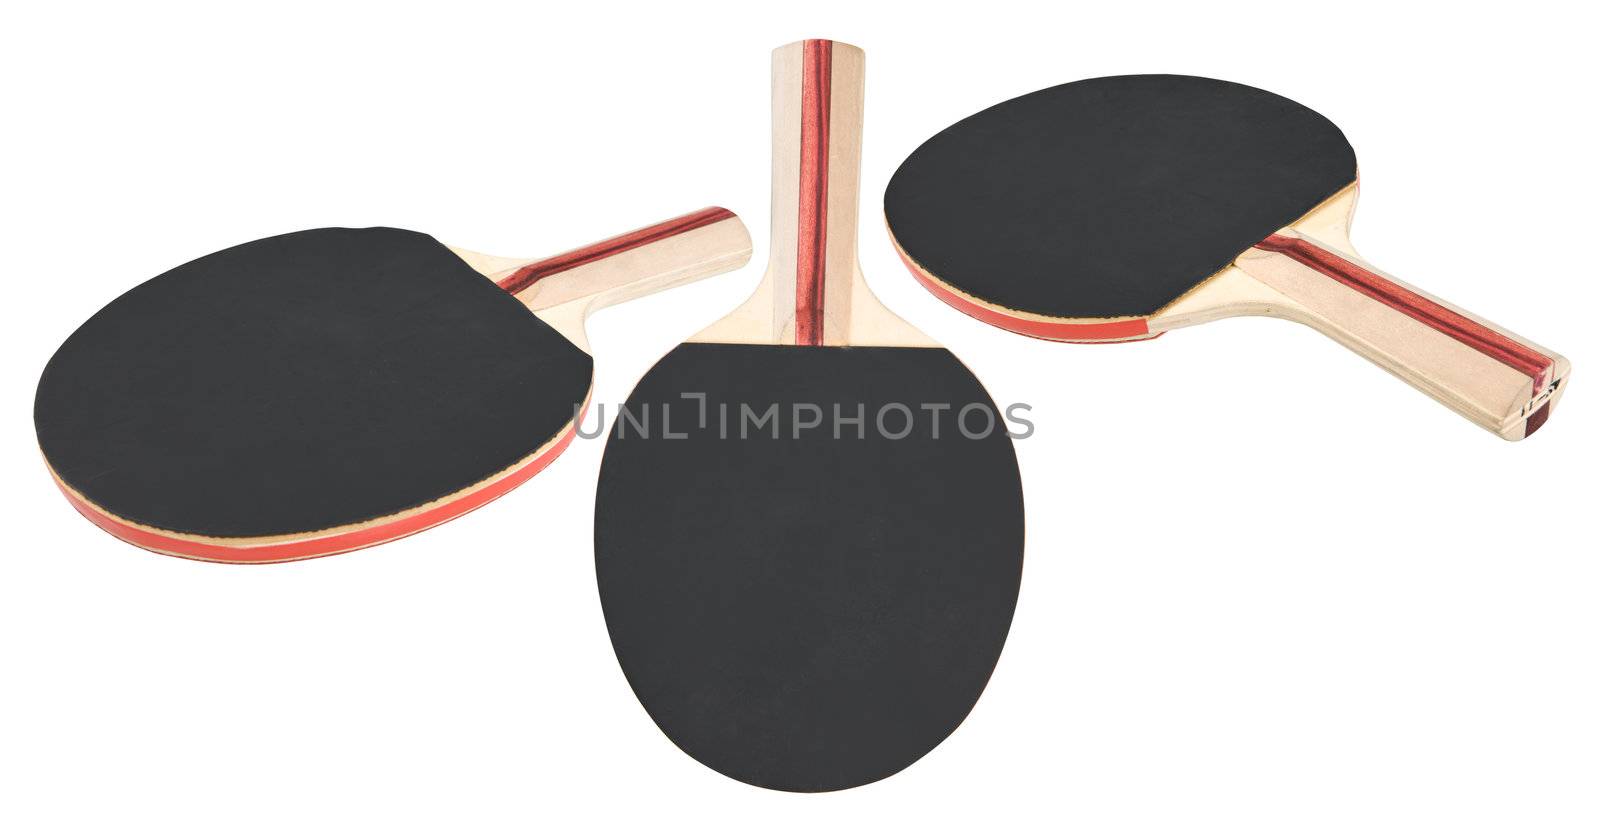 Three ping pong rackets isolated. Clipping pats